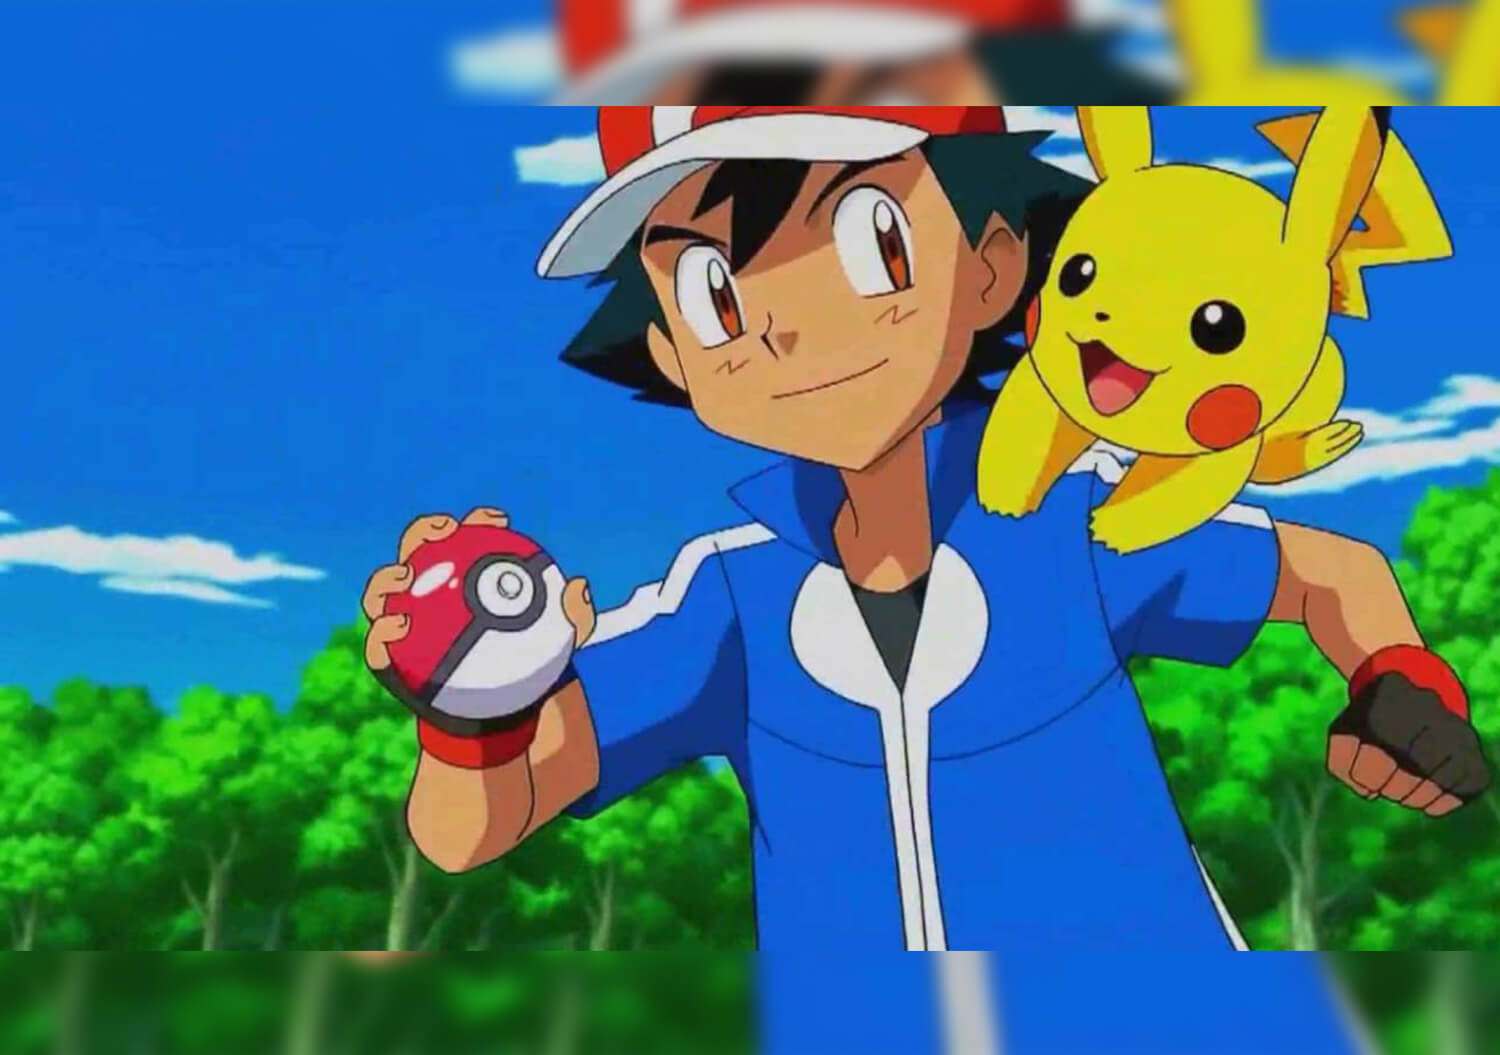 Ash Ketchum's fate finally confirmed after Pokemon Ultimate